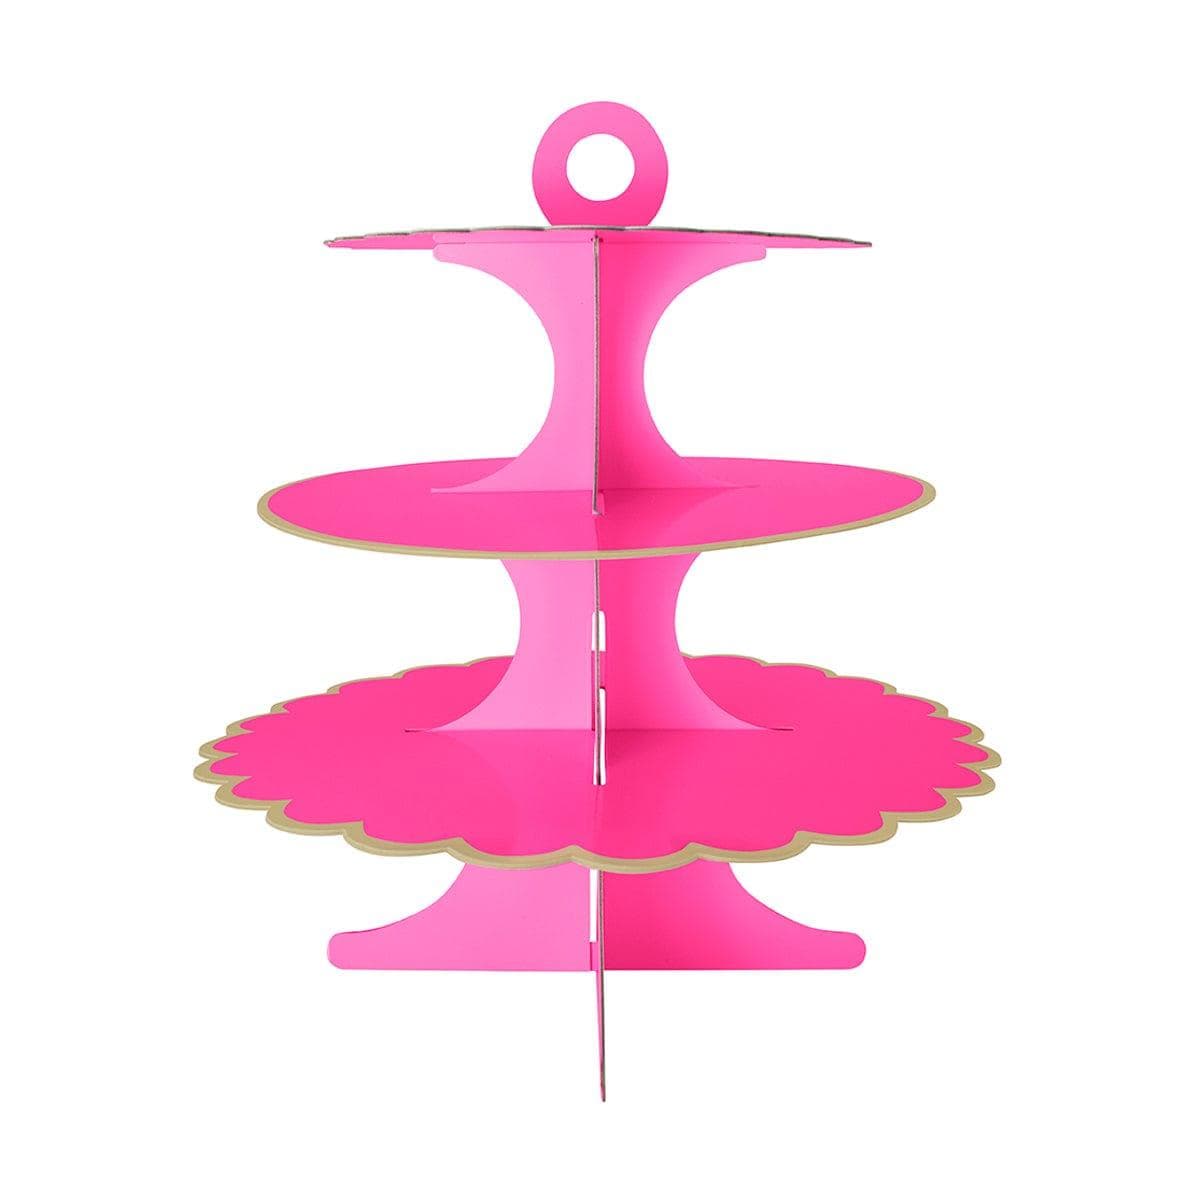 YIWU SANDY PAPER PRODUCTS CO., LTD Everyday Entertaining Cupcake Stand 3 Tiers, Hot Pink